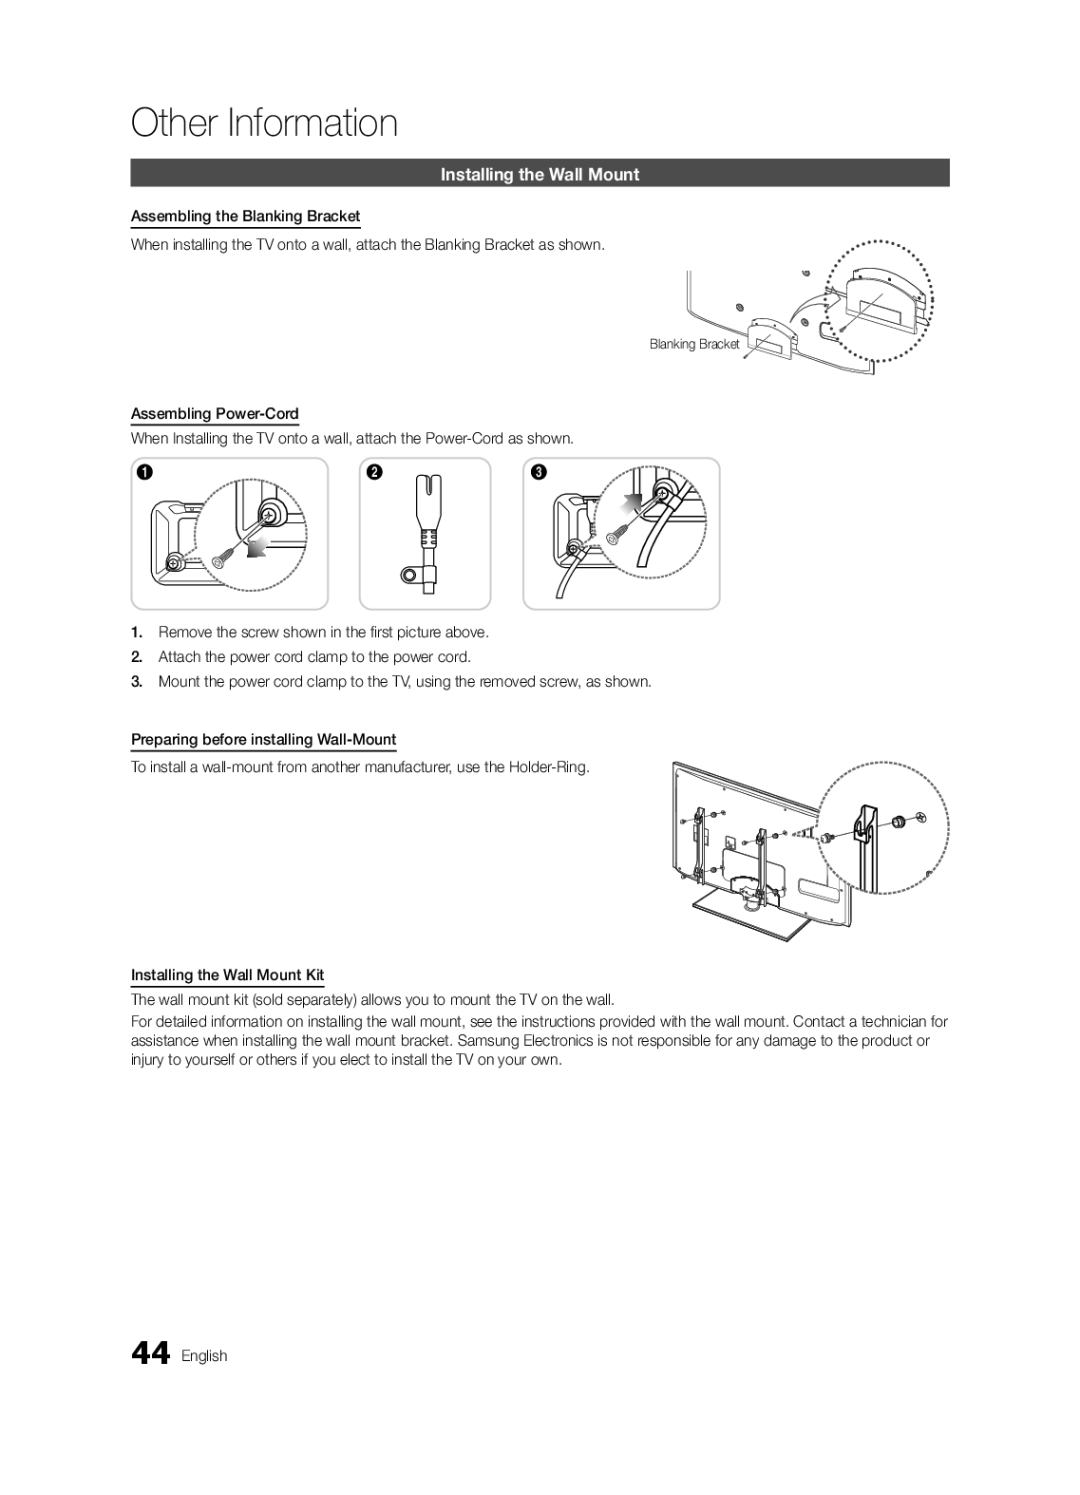 Samsung BN68-02625A-03, UC5000 user manual Installing the Wall Mount, Blanking Bracket 